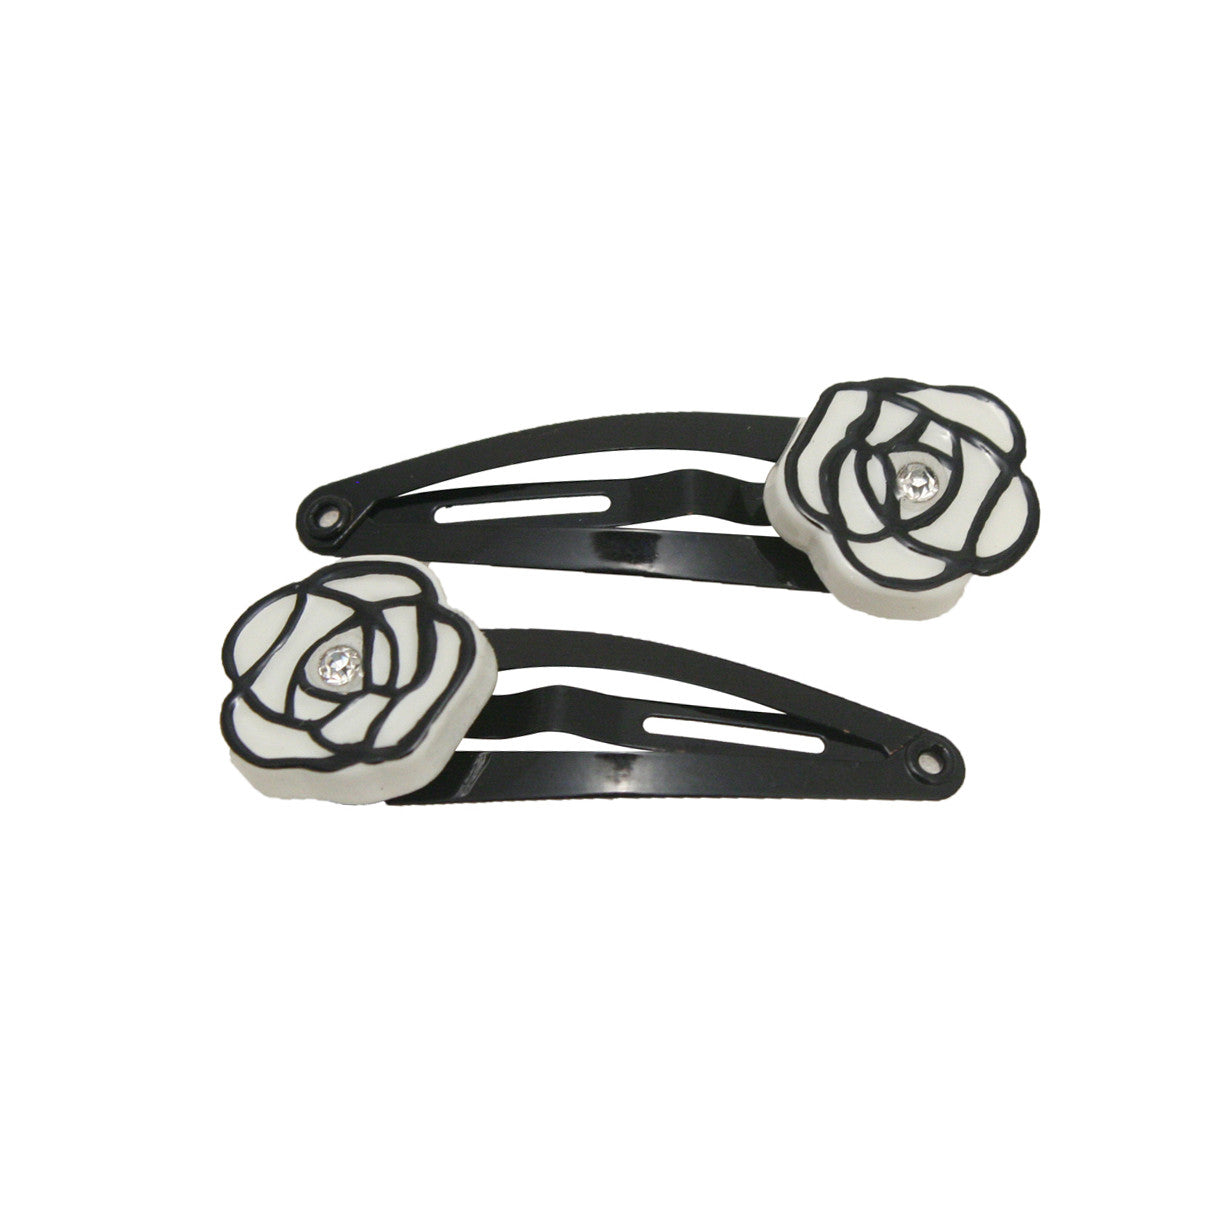 Mia® Snip Snaps® - White Roses with Black Trim - inspired by Chanel - designed by #MiaKaminski of #Mia® Beauty